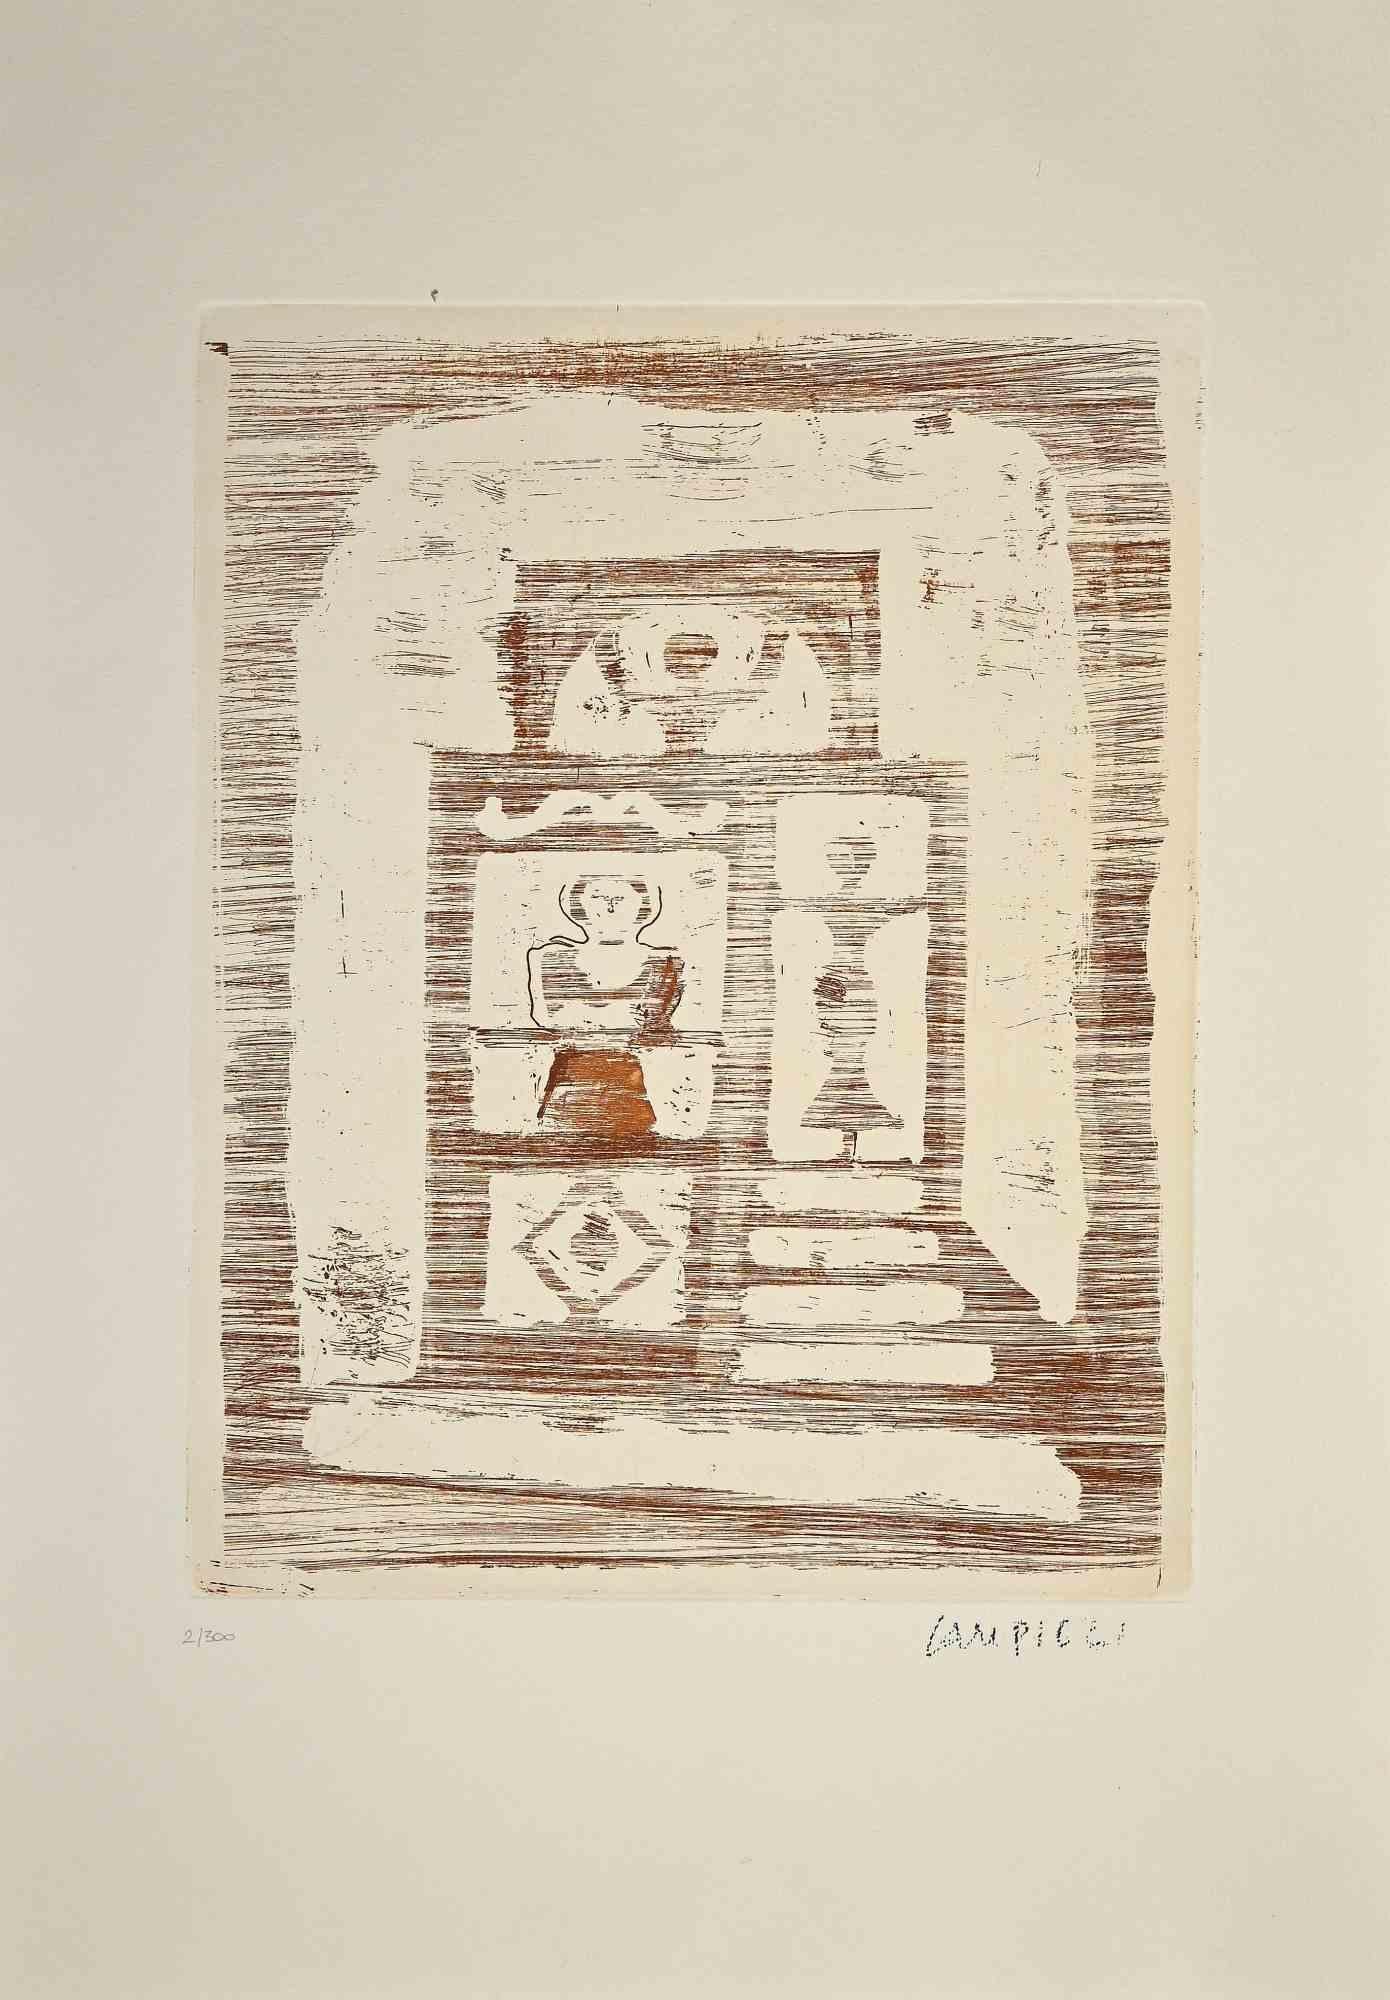 The Women's House is an original print realized by Massimo Campigli in between 1970-1971.

The artwork is an etching on paper. Limited edition series, numbered on the lower margin: 2/300 prints. The artwork is stamp-signed on the lower right.

This